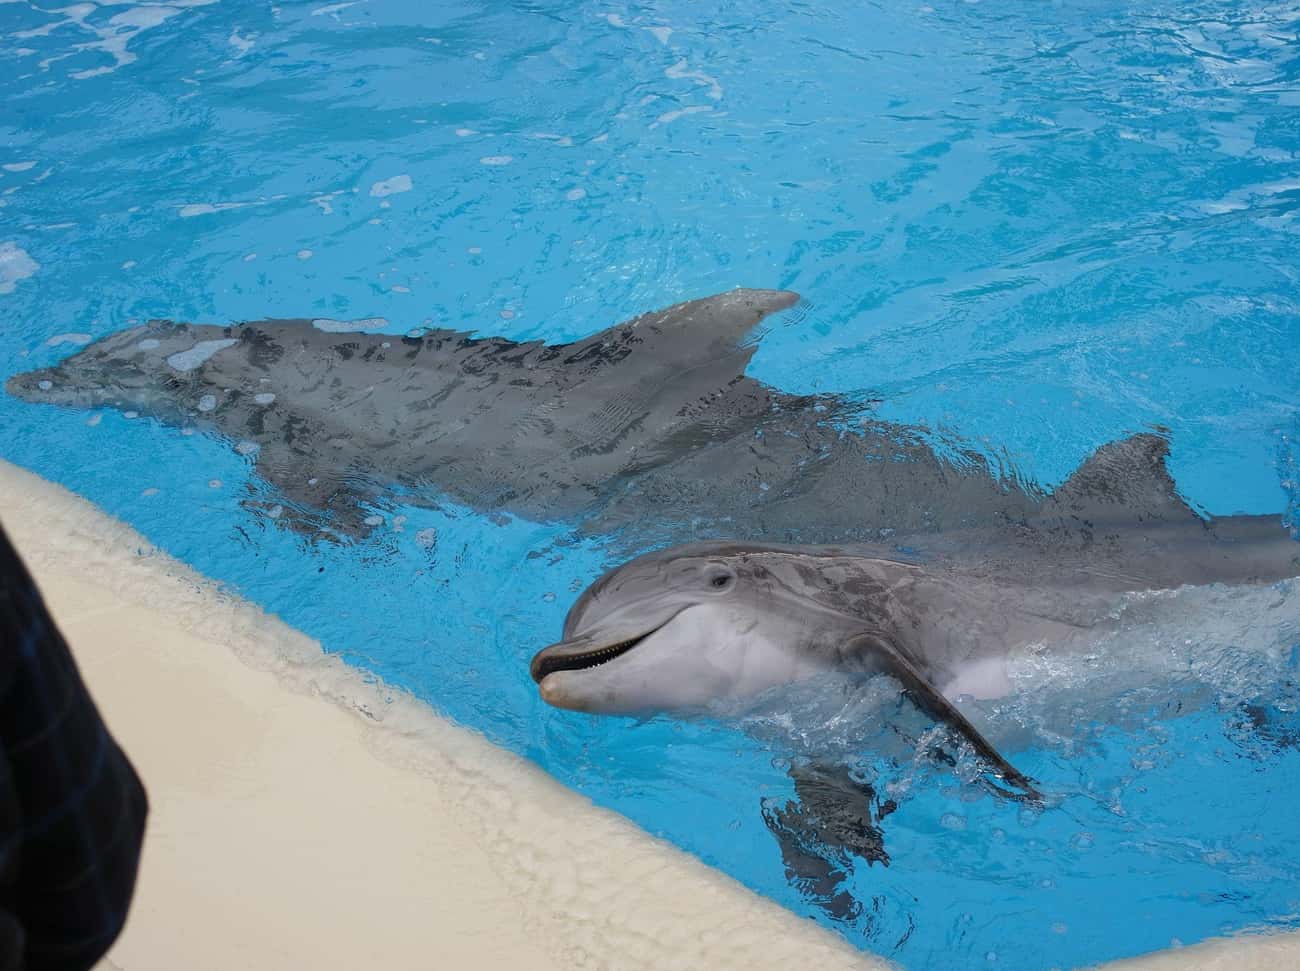 A Total Of Five Different Dolphins Were Captured And Used In The Flipper Television Series